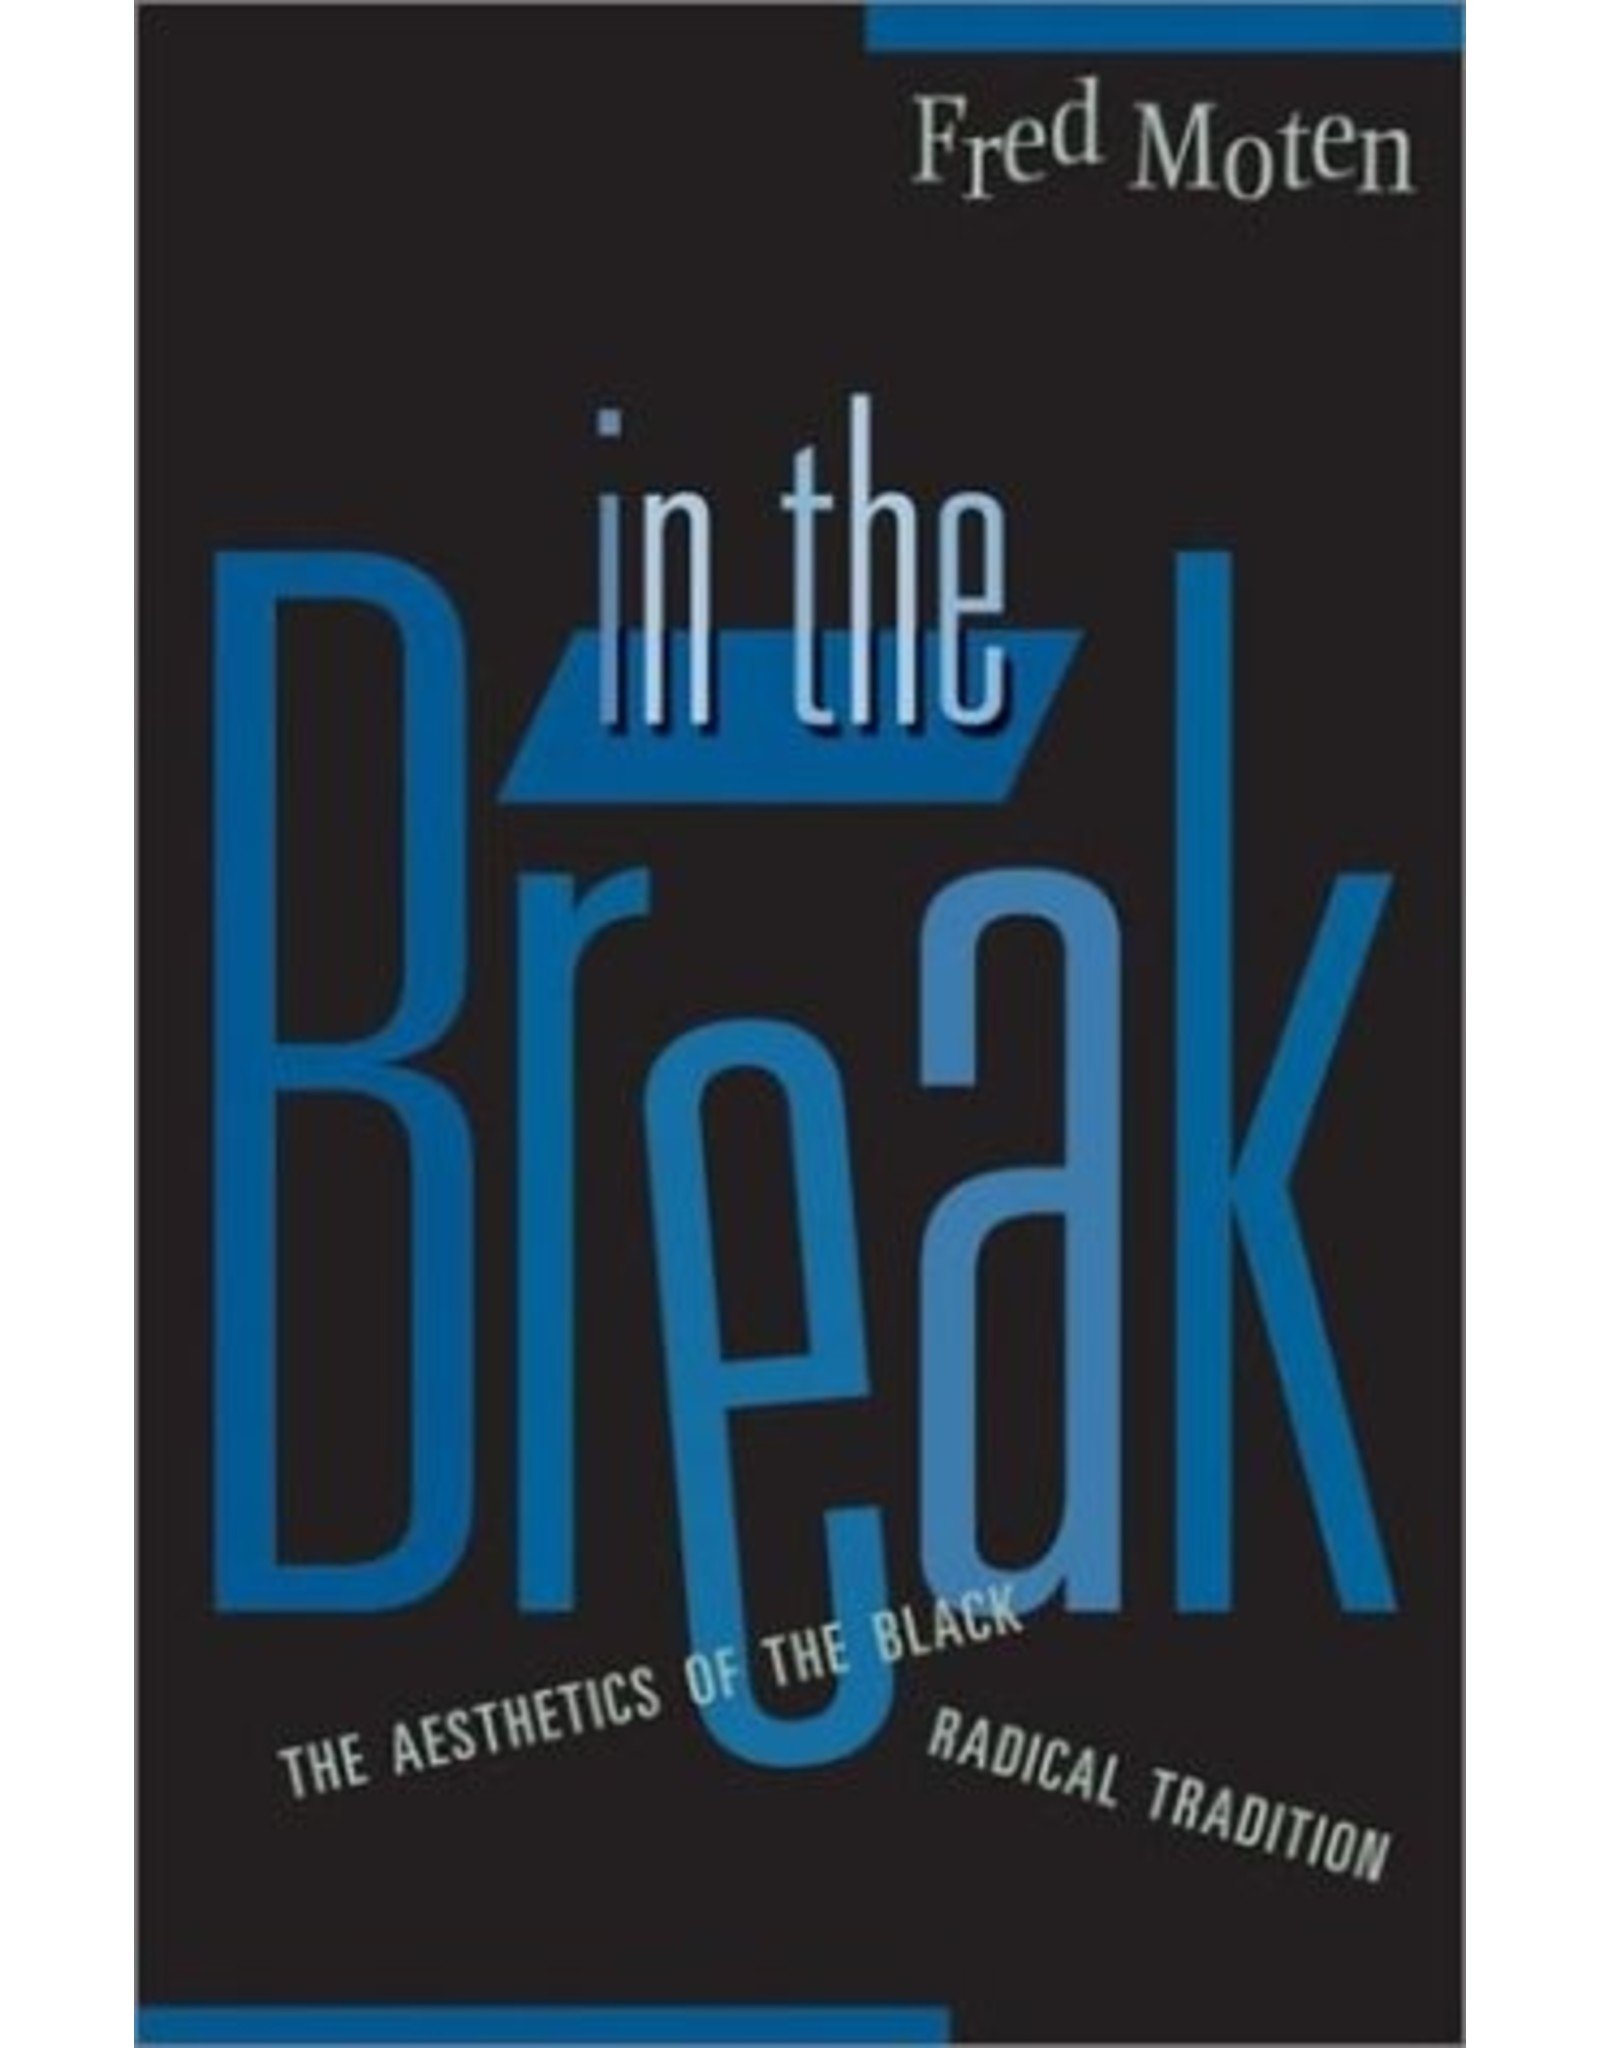 Textbook In the Break: The Aesthetics of the Black Radical Tradition